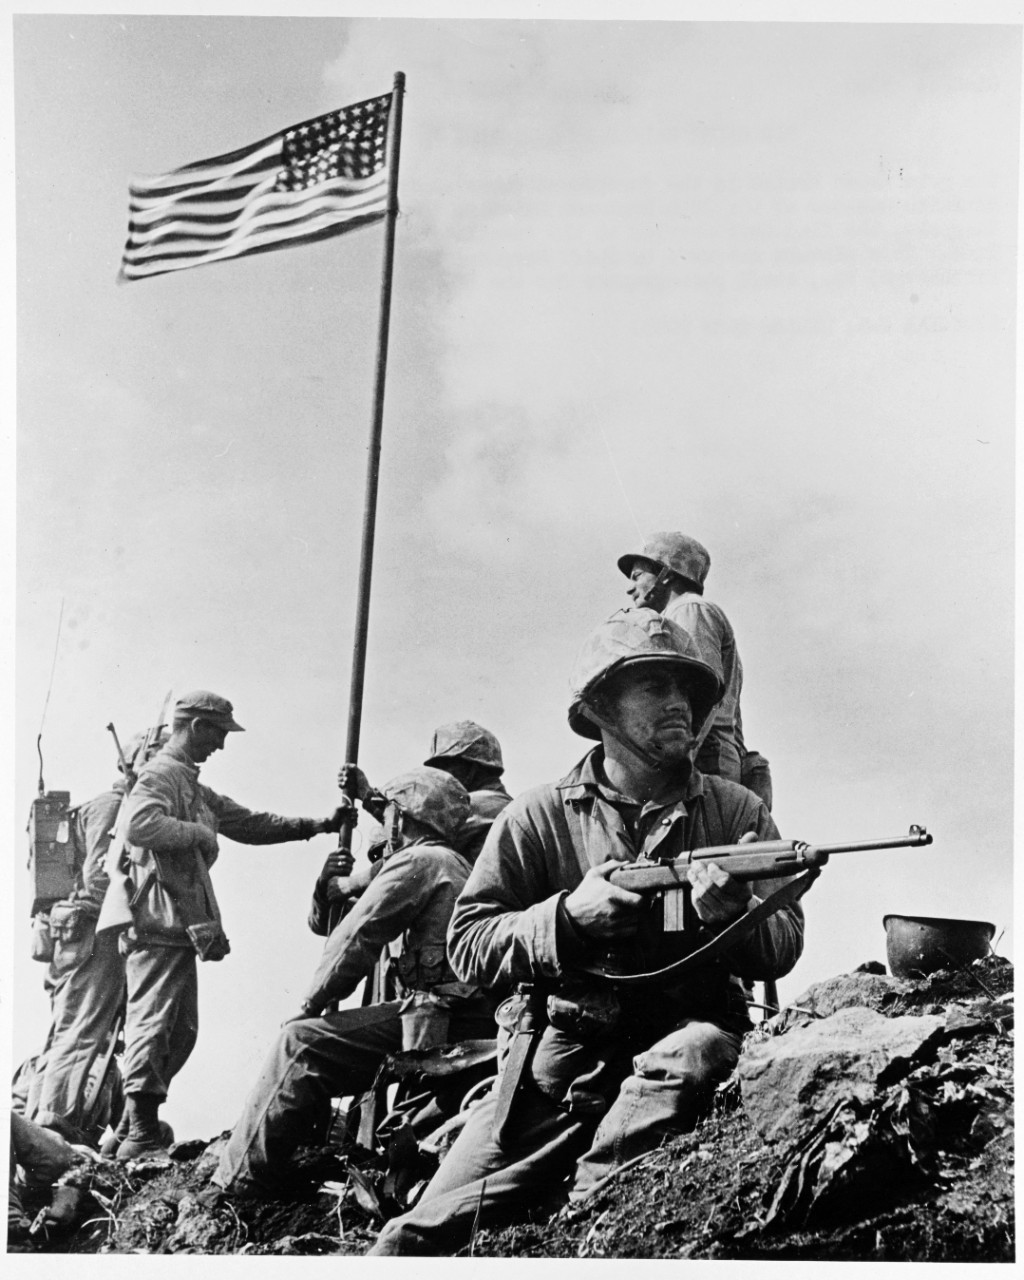 Photo #: NH 104150 Iwo Jima Operation, 1945. The First Flag Raising on Mount Suribachi, Iwo Jima, 23 February 1945 Marines of the 28th Regiment, Fifth Marine Division, hoist the U.S. flag on a piece of pipe, at about 1020 Hrs. on 23 February 1945, after they had captured the summit of Mount Suribachi. This was some seventeen minutes before the famous flag-raising immortalized by Associated Press photographer Joe Rosenthal. Holding the flagpole are Sergeant Henry O. Hansen, Private Philip L. Ward, Pharmacist’s Mate 2<sup>nd</sup> Class John Bradley. In the foreground Private First Class J.R. Michaels stands guard with an M-1 Carbine. Corporal C.W. Lindberg is behind him. (details from Morison: Vol. XIV, frontispiece and page 61). Taken by Staff Sergeant Louis R. Lowery, USMC, staff photographer for Leatherneck magazine. The original photograph came from the illustrations package for Rear Admiral Samuel Eliot Morison's History of United States Naval Operations in World War II, volume XIV: Victory in the Pacific (frontispiece). Official U.S. Marine Corps Photograph, from the collections of the Naval History and Heritage Command.